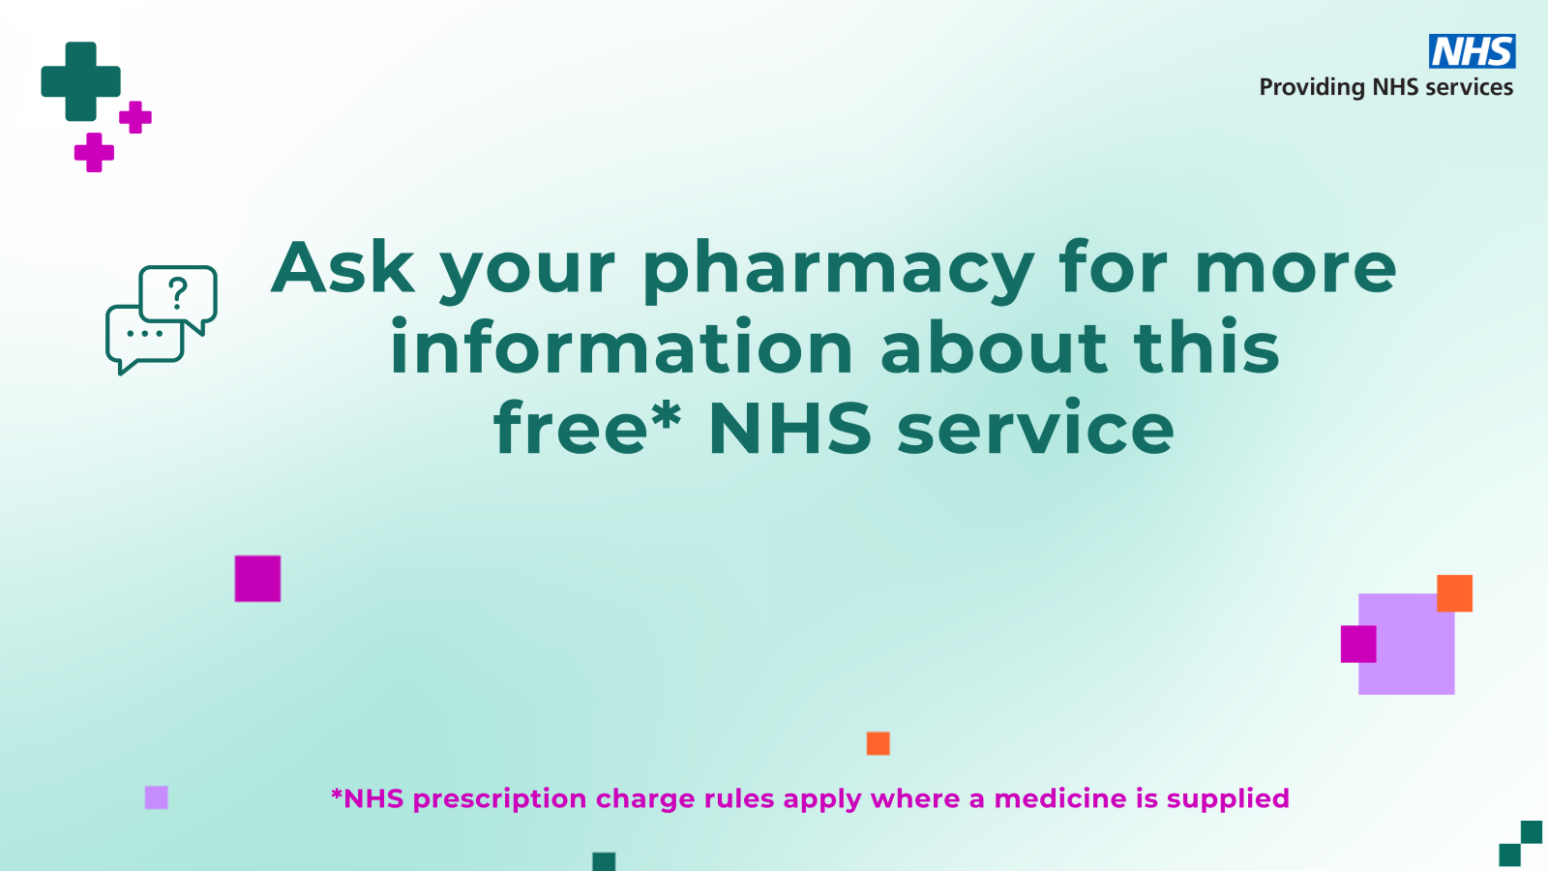 Ask your pharmacy for more information about this NHS service